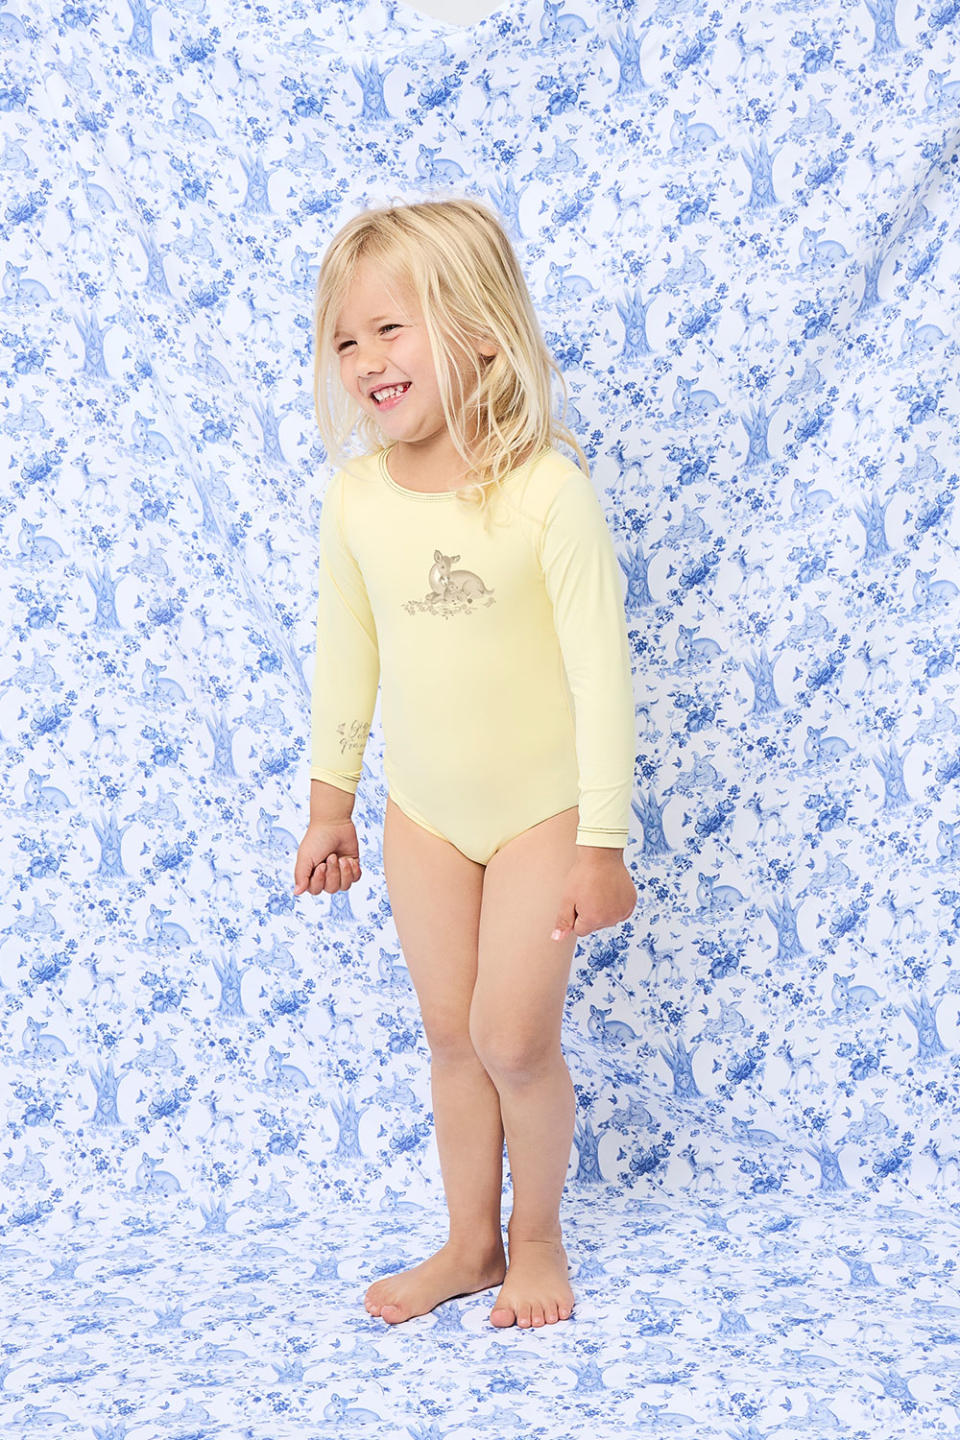 Pieces from Frankies Bikinis’ Lil Frankies children’s collection. - Credit: Courtesy Photo